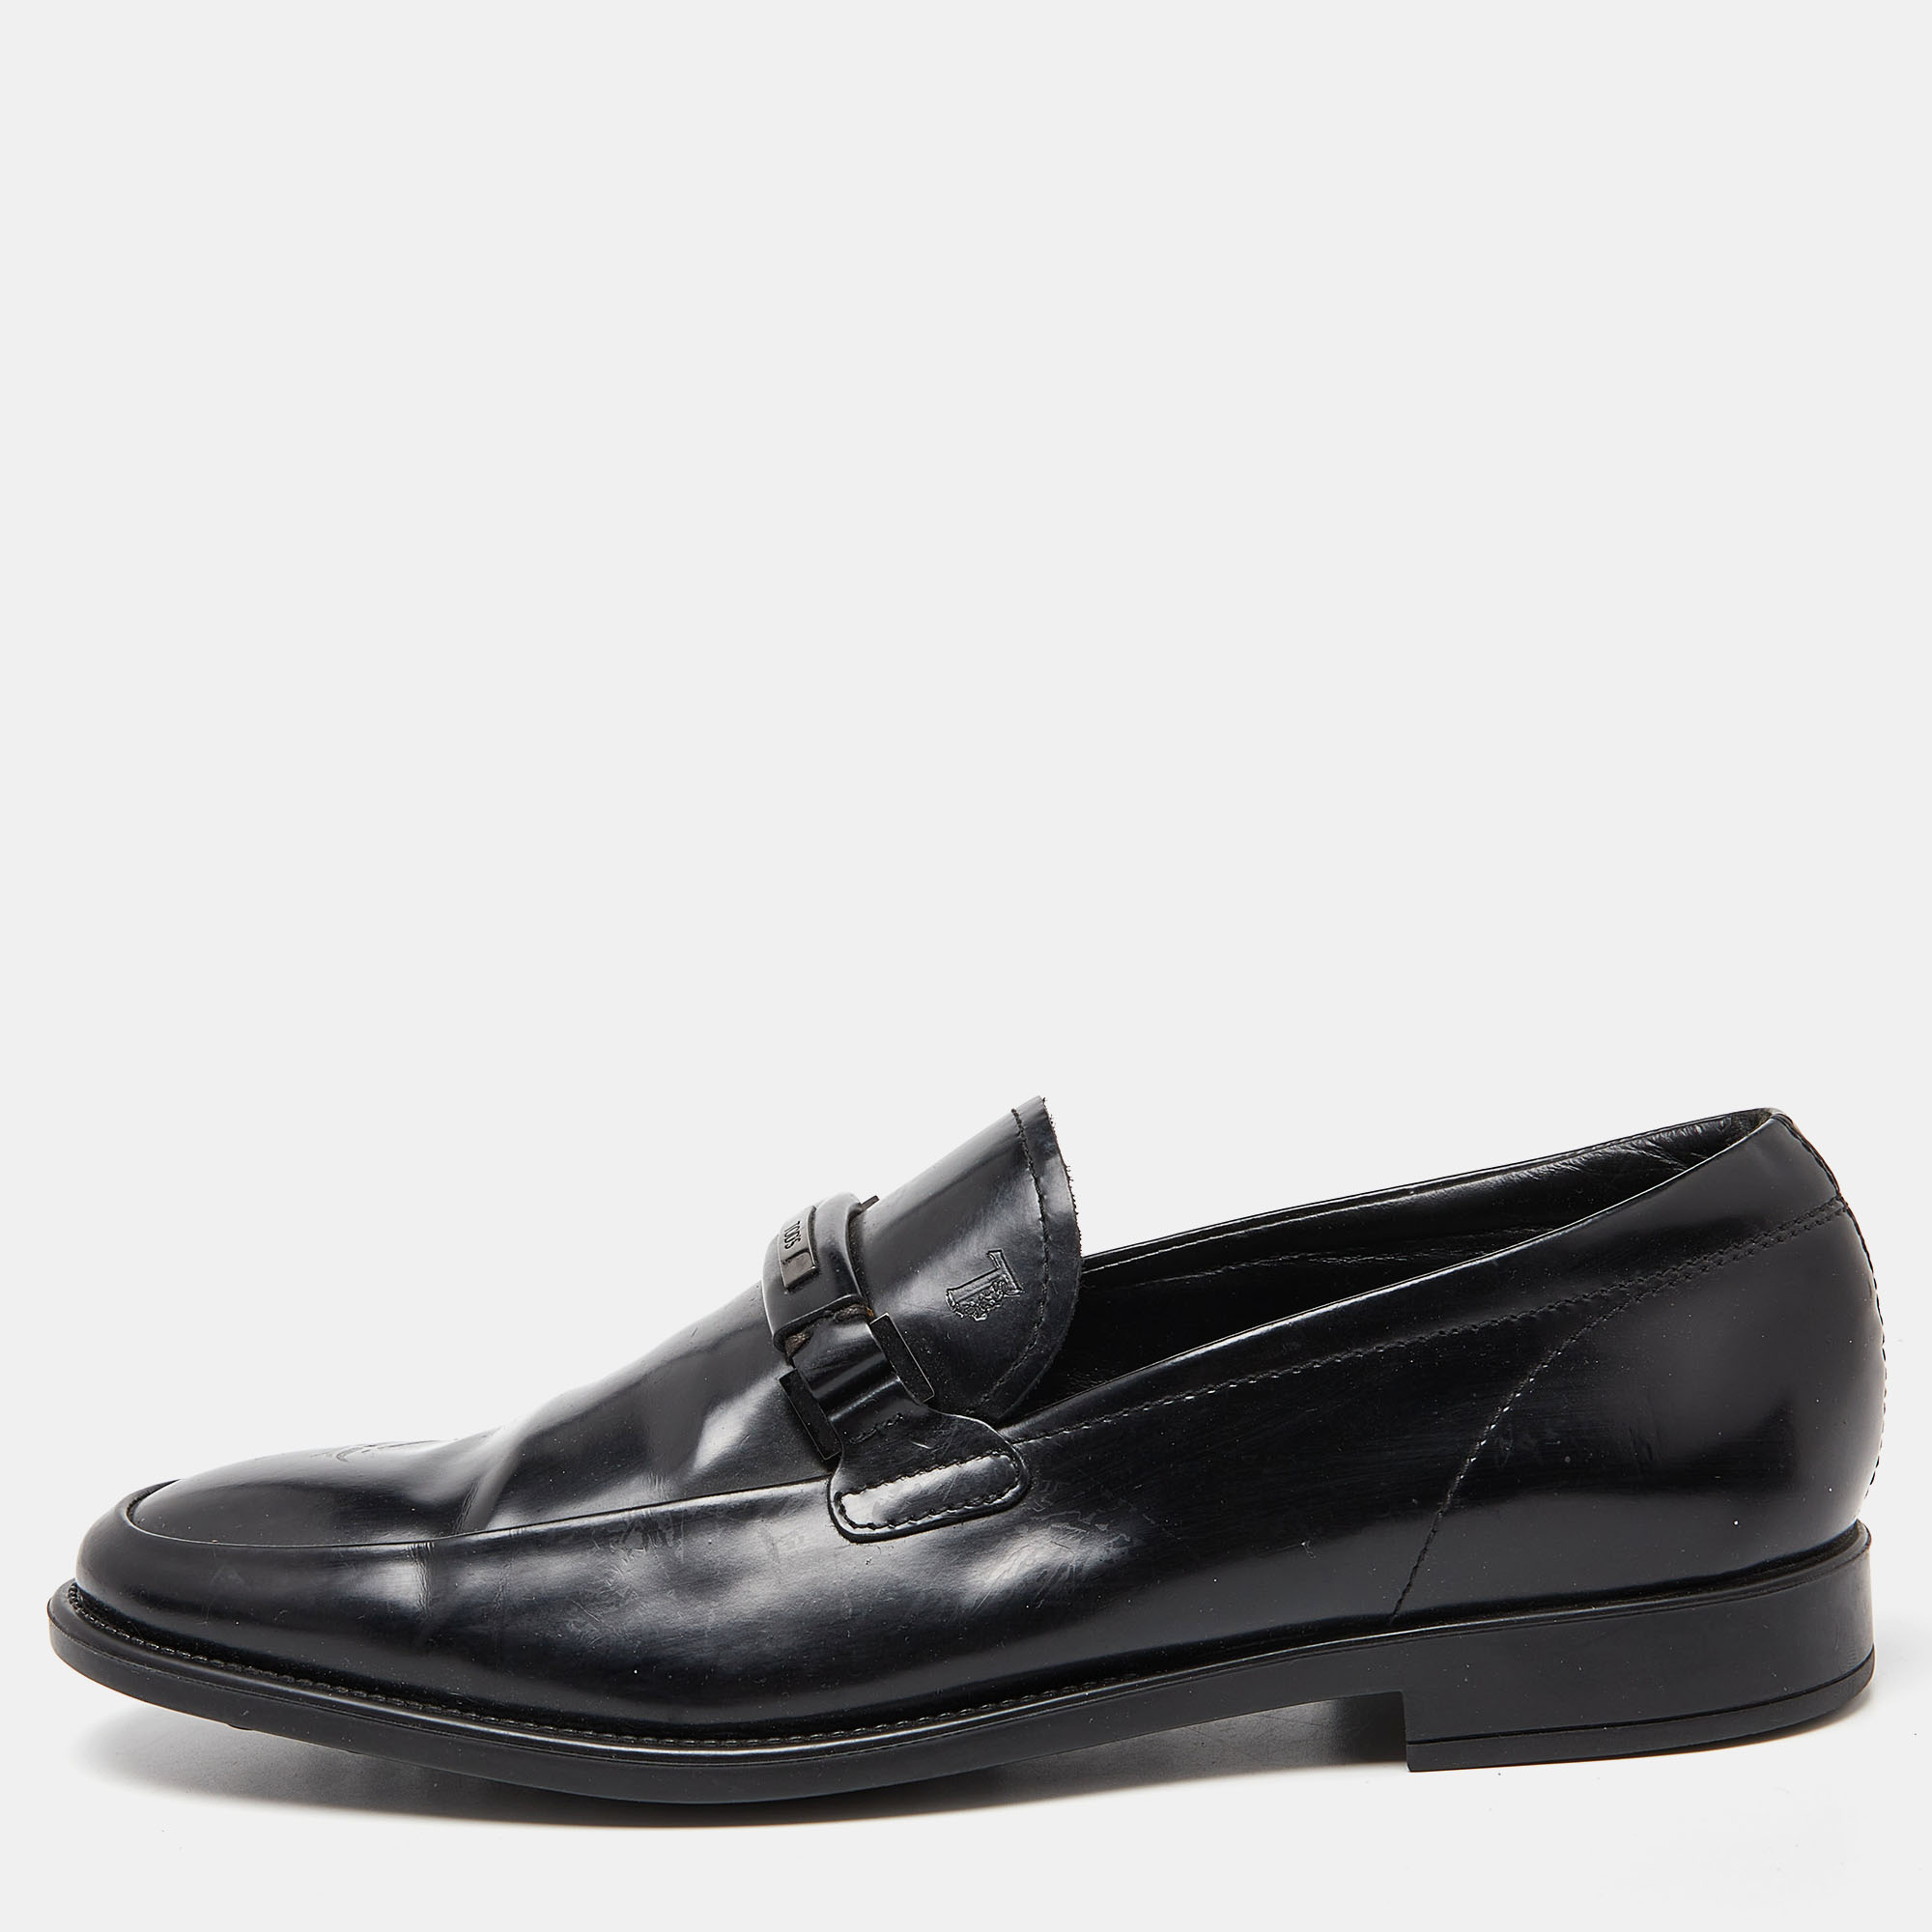 Pre-owned Tod's Black Patent Leather Slip On Loafers Size 39.5